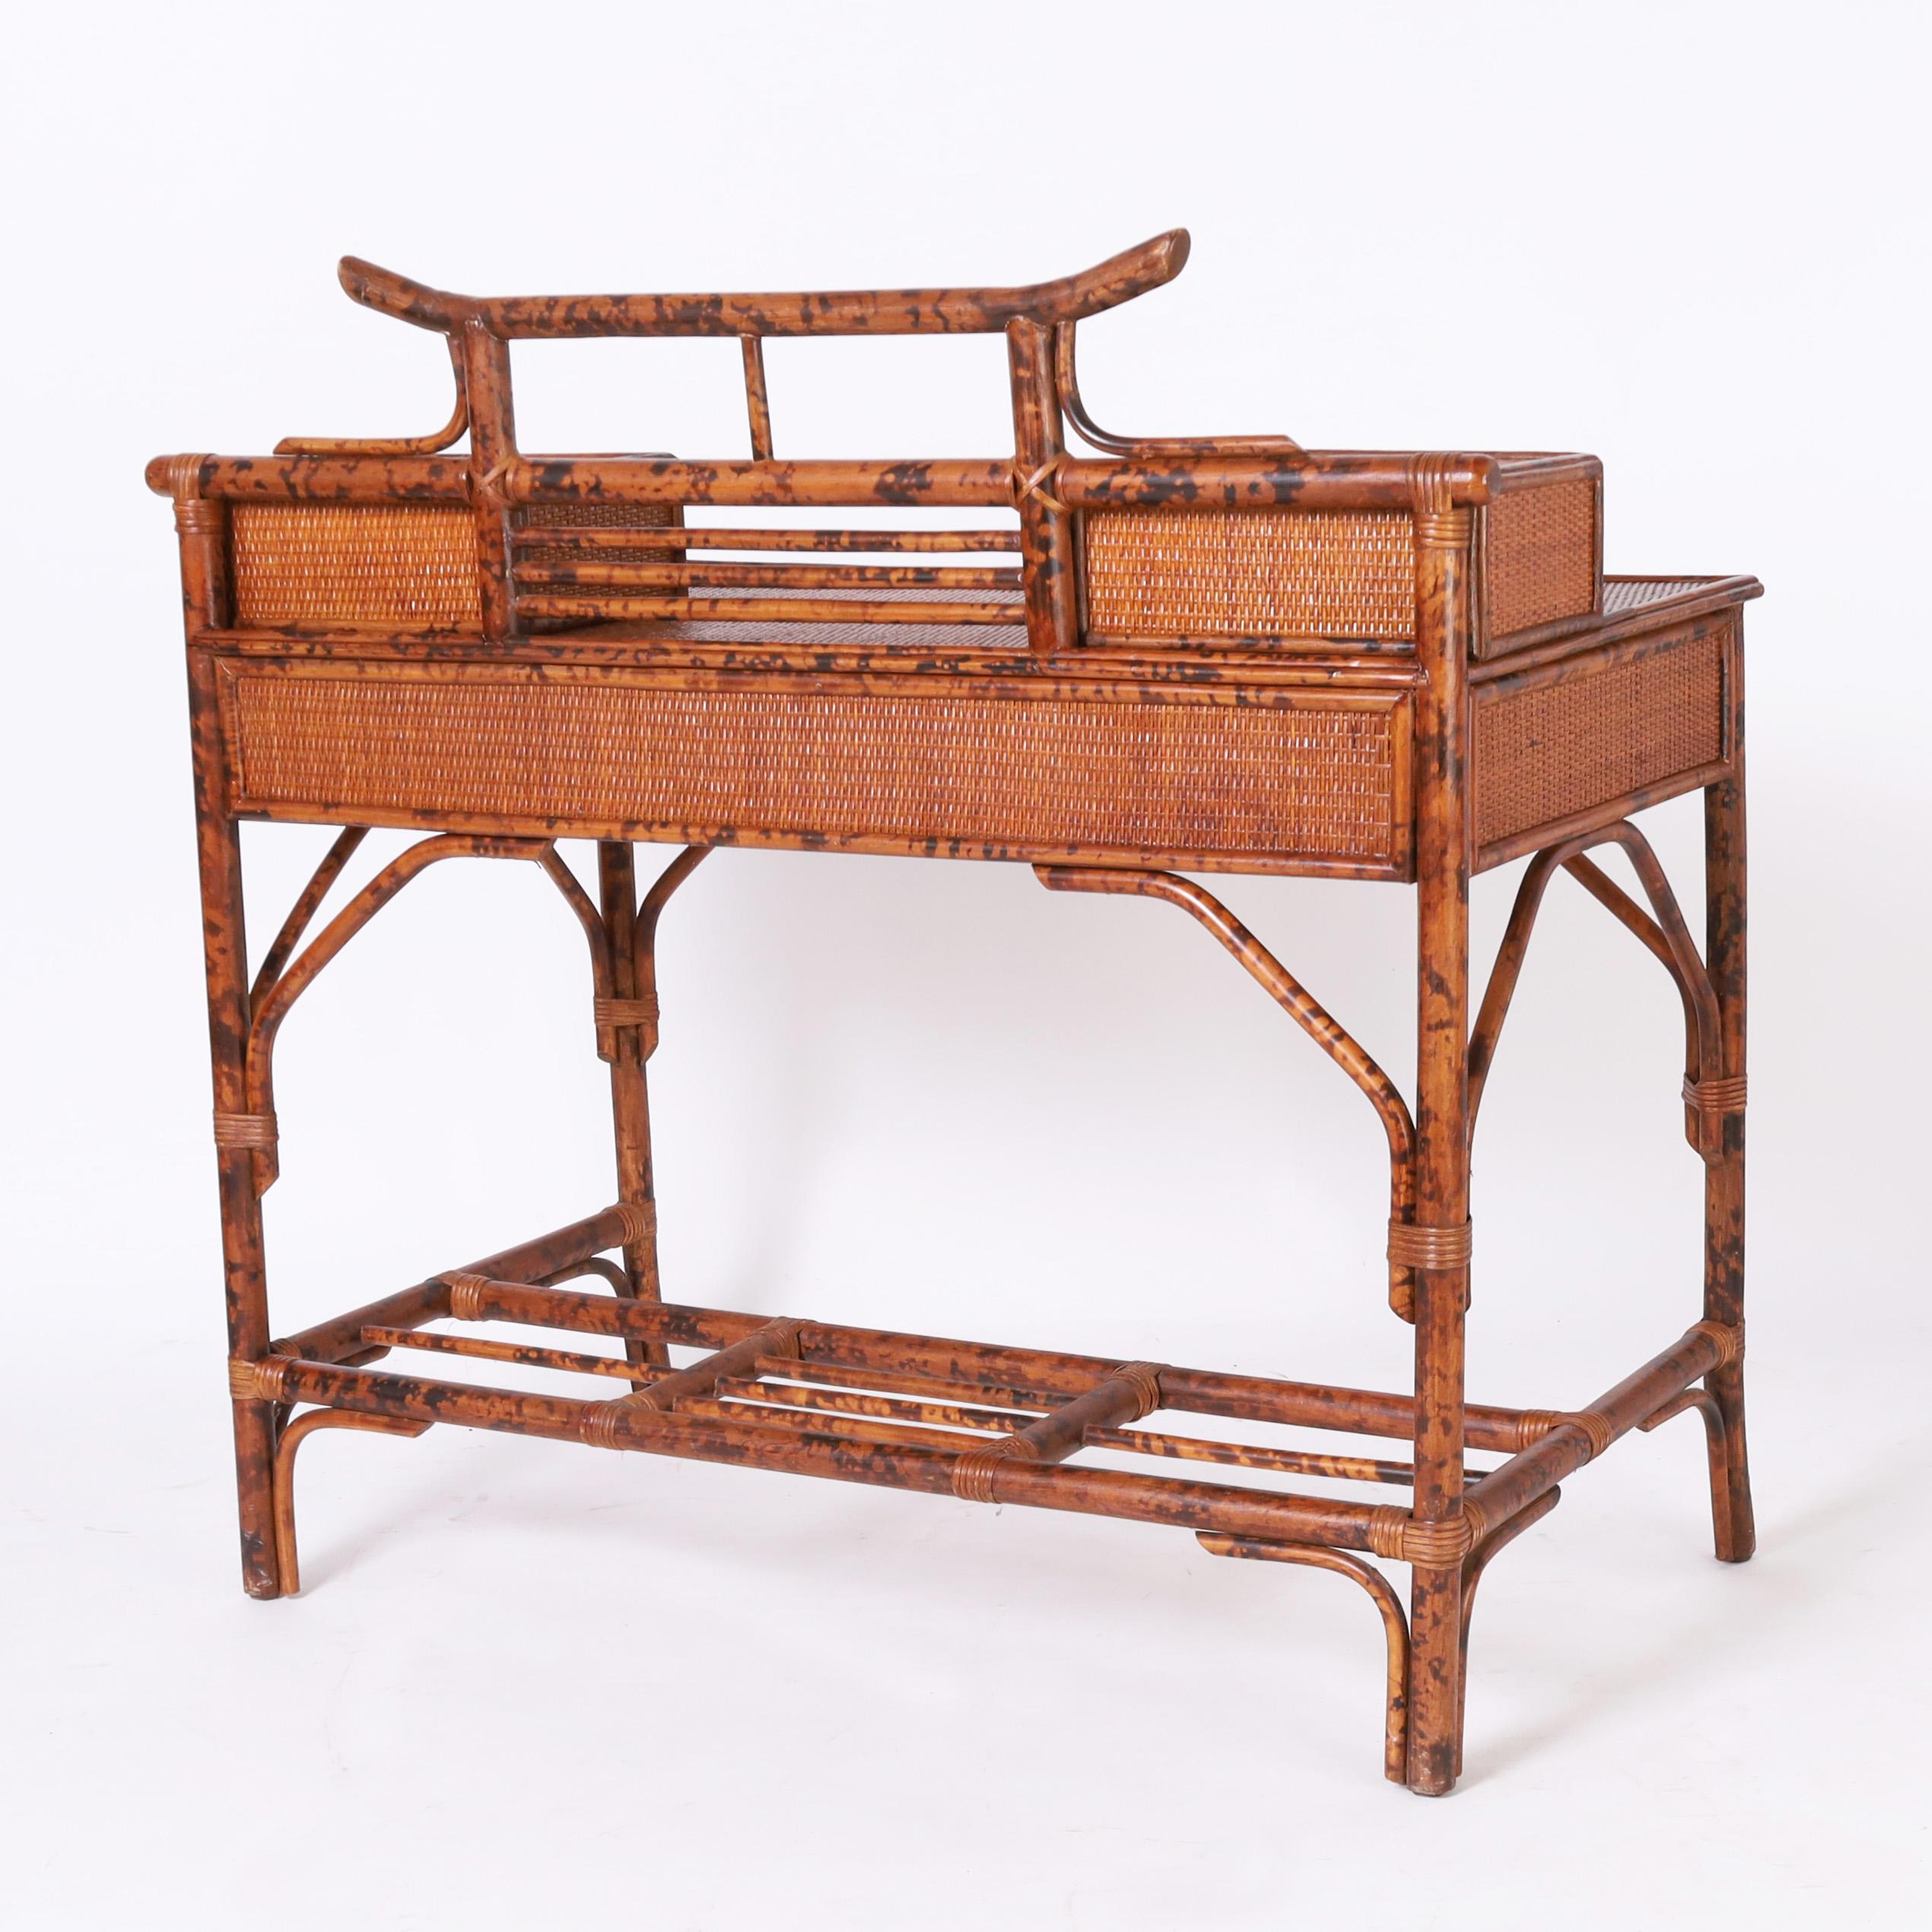 Hand-Crafted British Colonial Style Faux Bamboo and Grasscloth Pagoda Desk For Sale